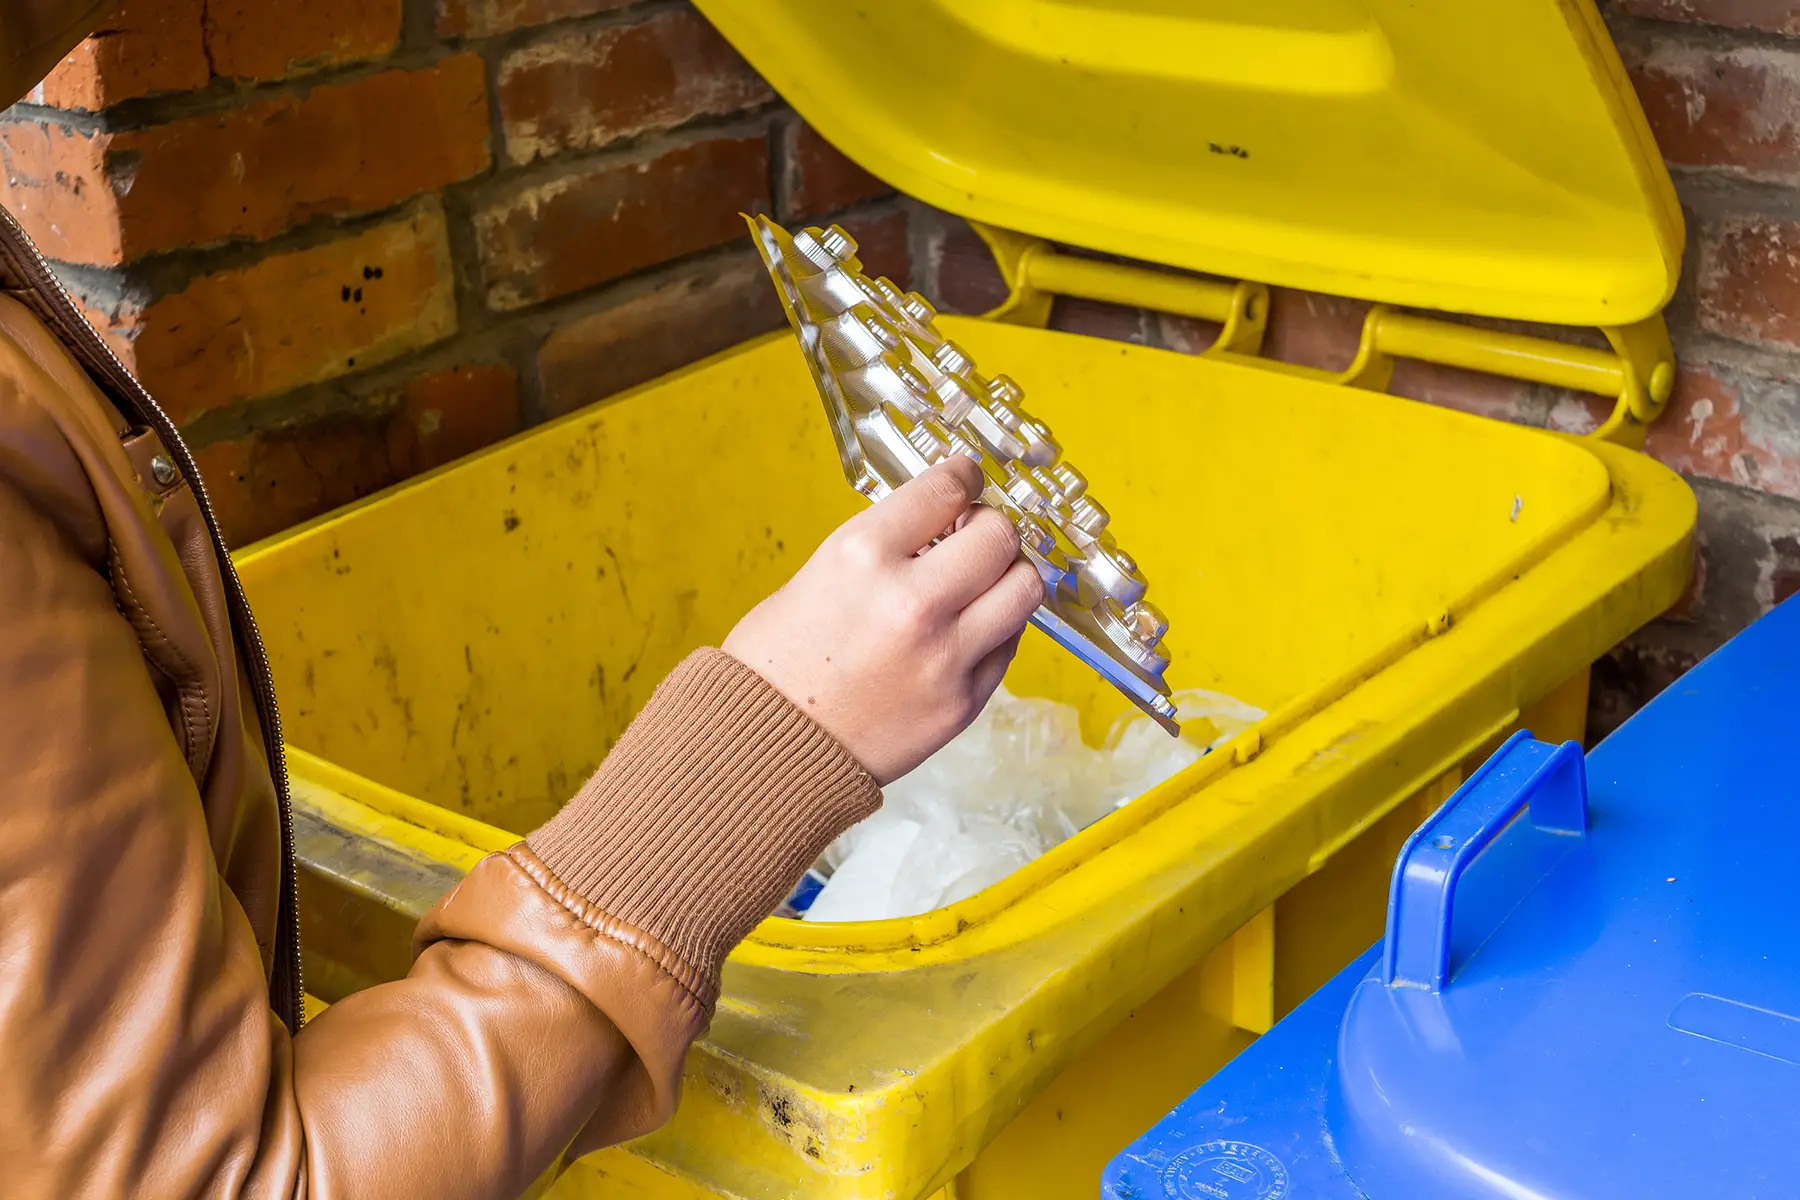 A person puts some packaging into a yellow bin